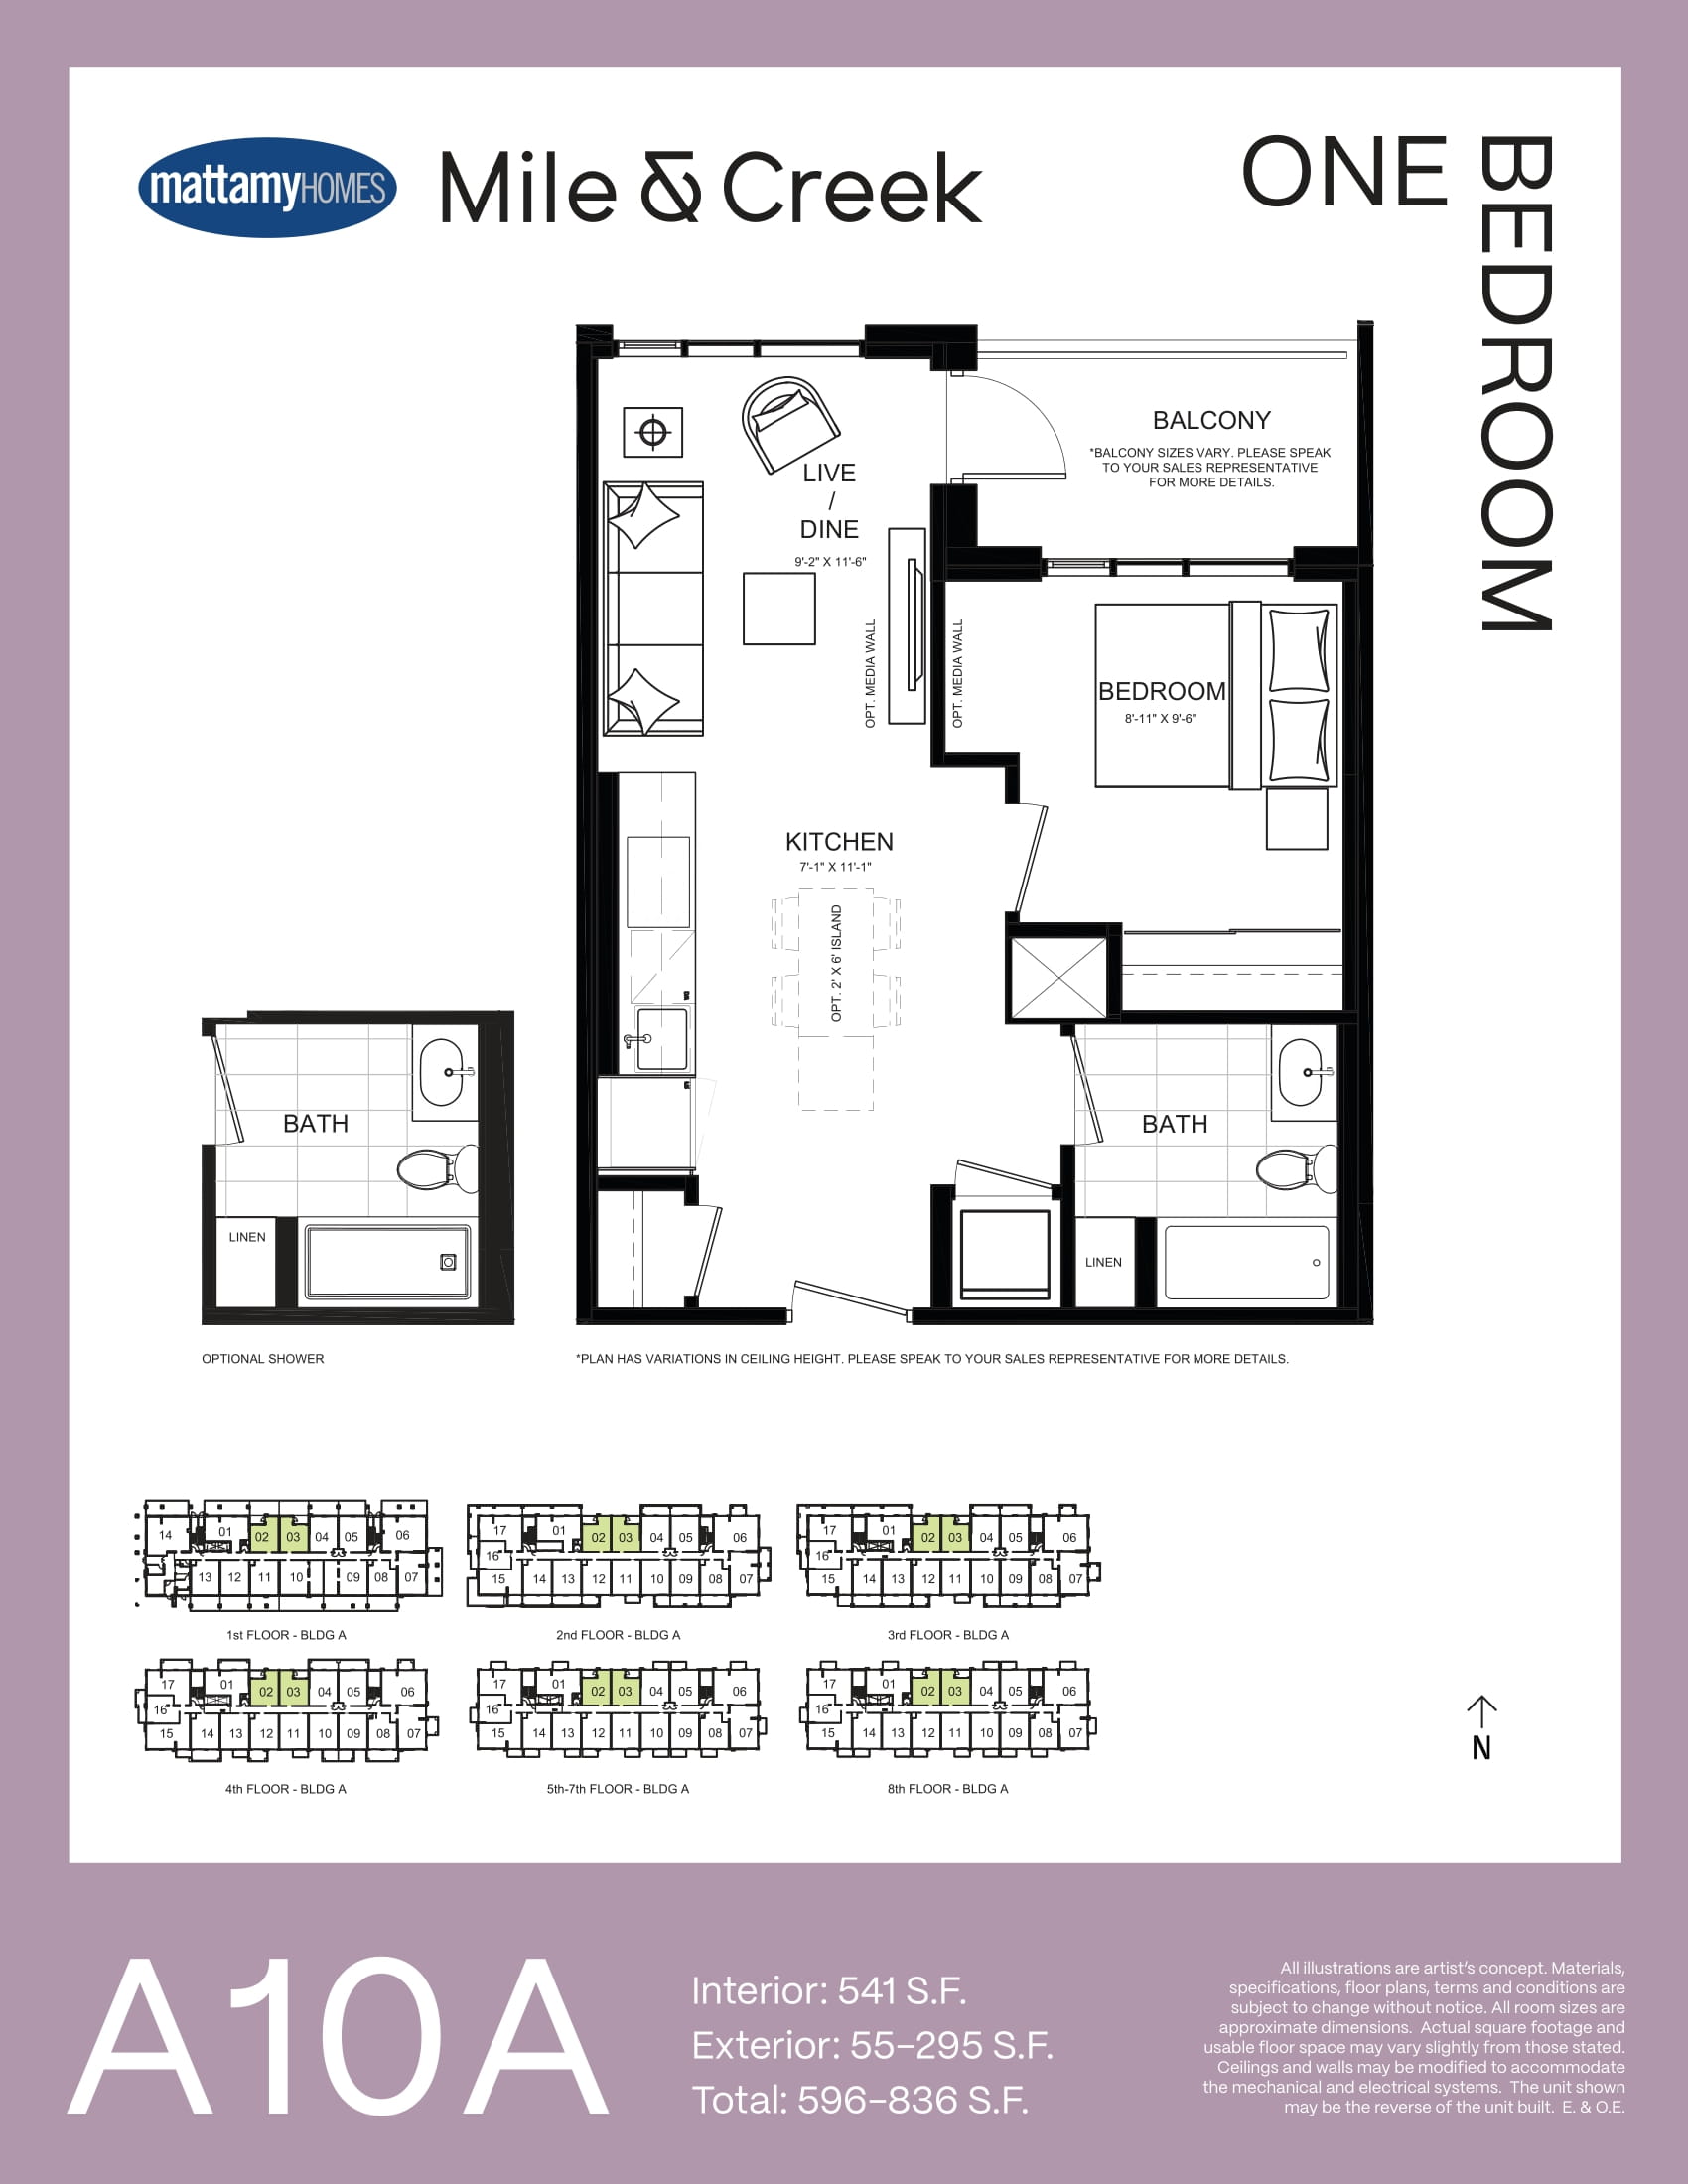  Floor Plan of Mile and Creek Condos with undefined beds